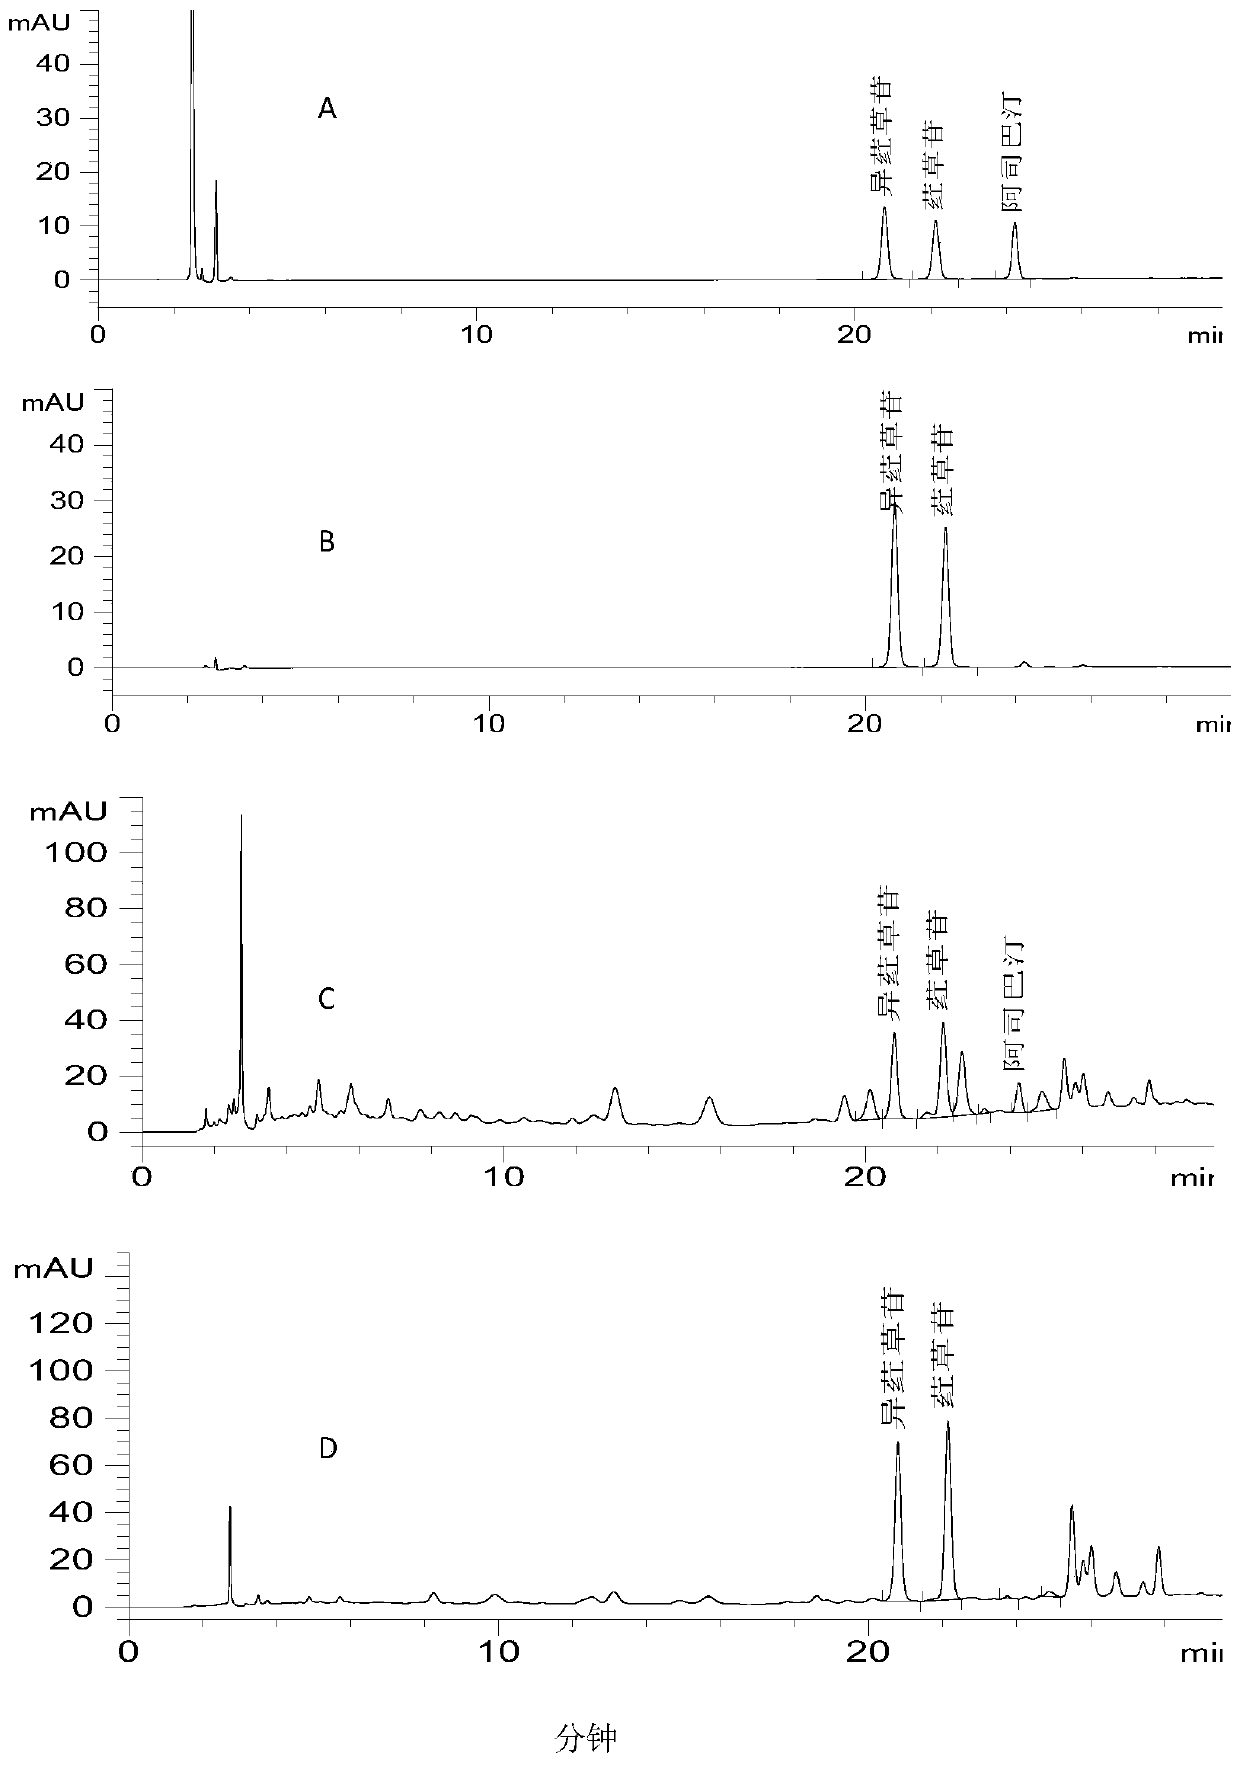 Method for measuring contents of three kinds of components in aspalathus linearis (brum.f.) r.dahlgren, aspalathus linearis (brum.f.) r.dahlgren extractive, and aspalathus linearis (brum.f.) r.dahlgren tea